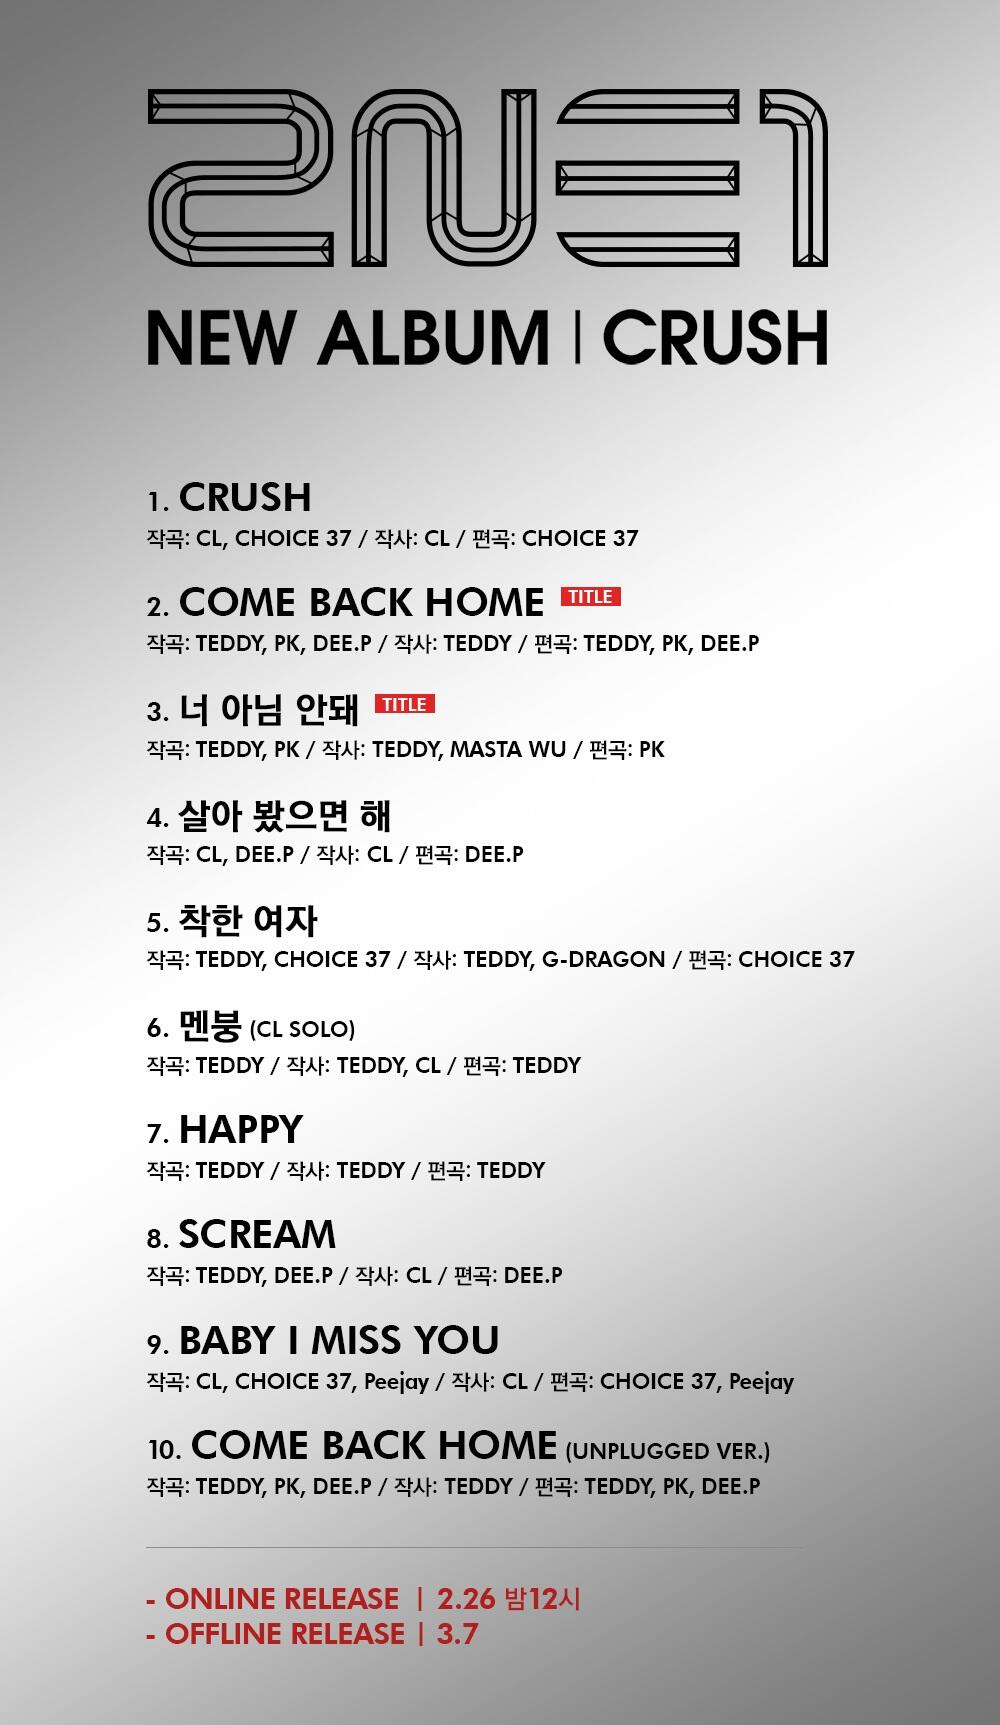 Jacly G Dragon Wrote Lyrics For 2ne1 S New Song 착한 여자 Kind Girl Number 5 Of The Tracklist Http T Co F4zl9qhn4l Twitter